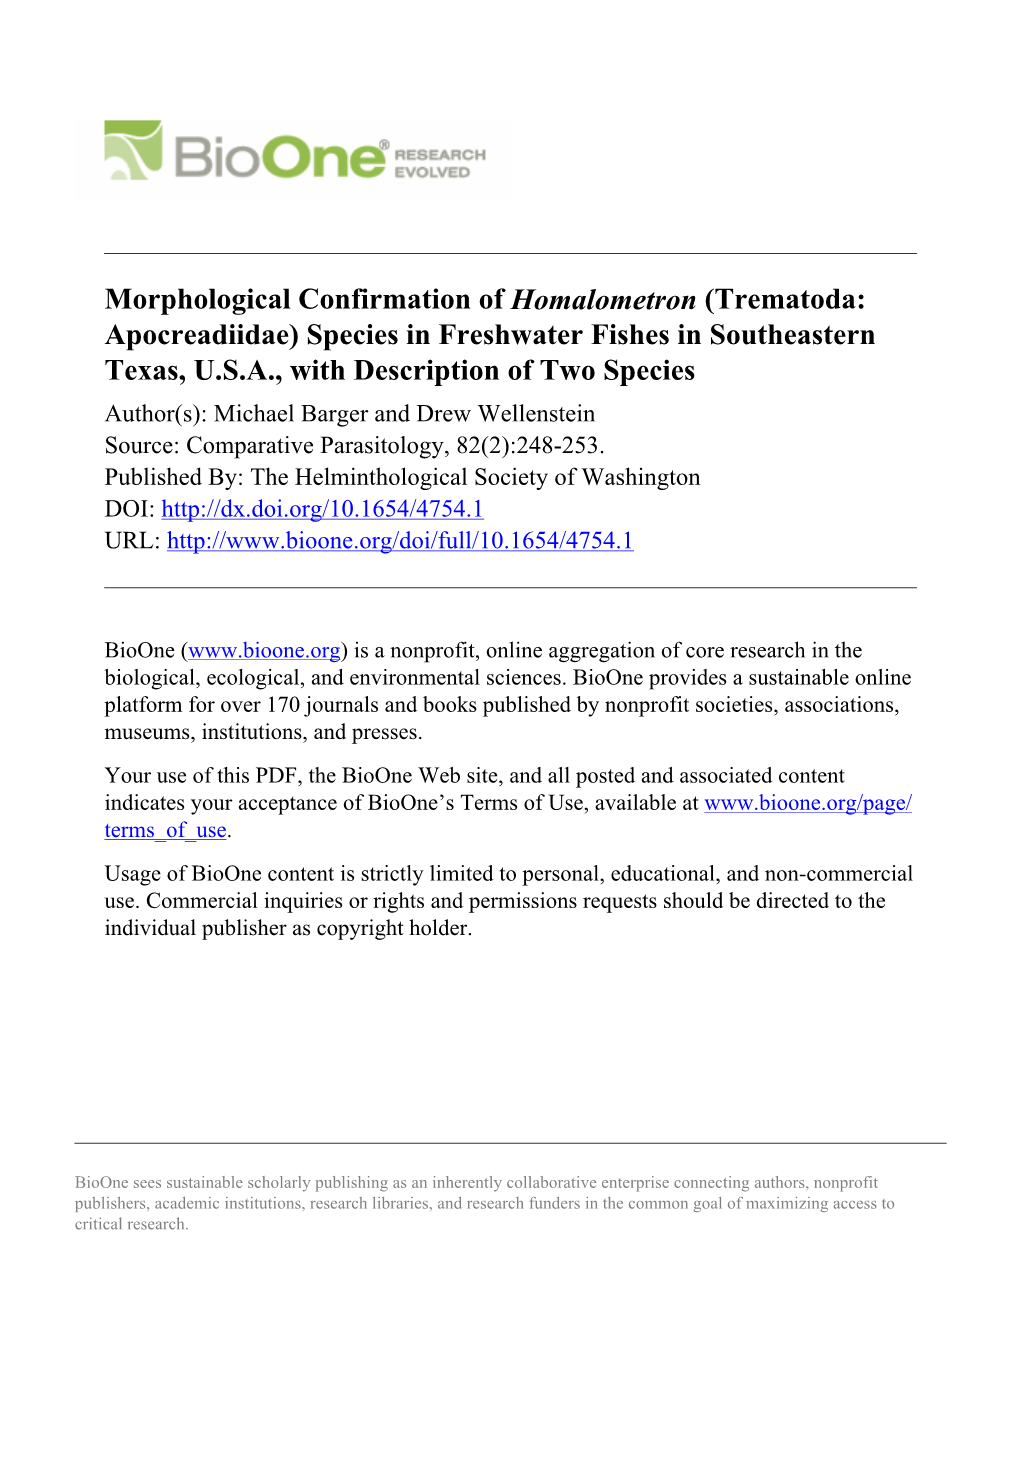 Morphological Confirmation of Homalometron (Trematoda: Apocreadiidae) Species in Freshwater Fishes in Southeastern Texas, U.S.A